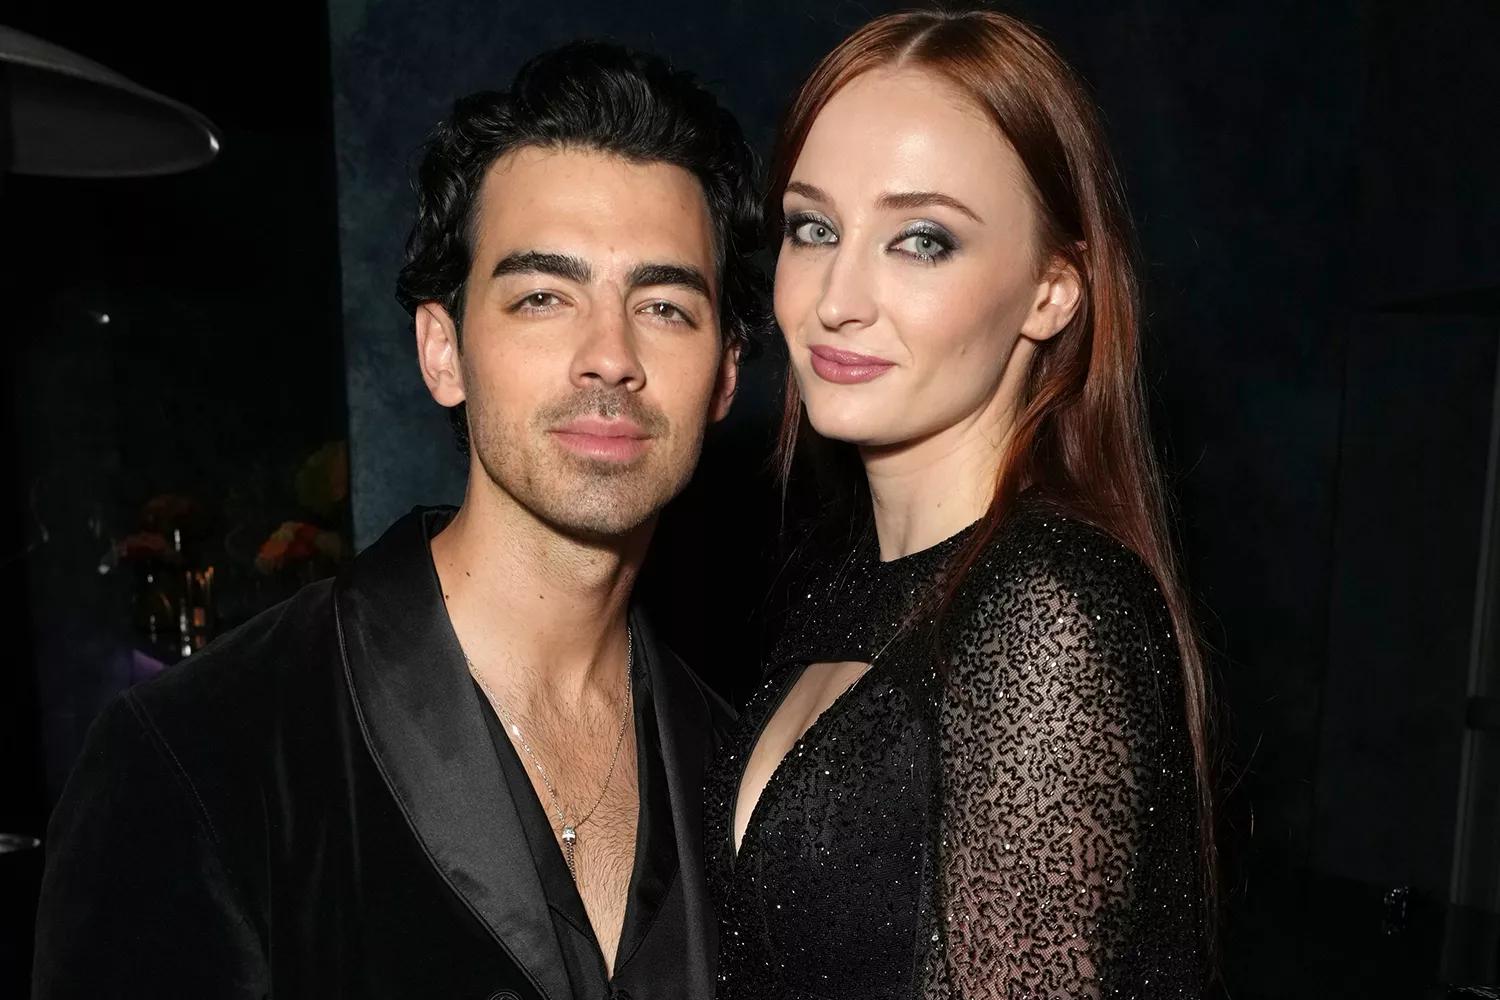 Joe Jonas Files for Divorce and Takes Custody of Kids: Inside the Unraveling of His Marriage to Sophie Turner